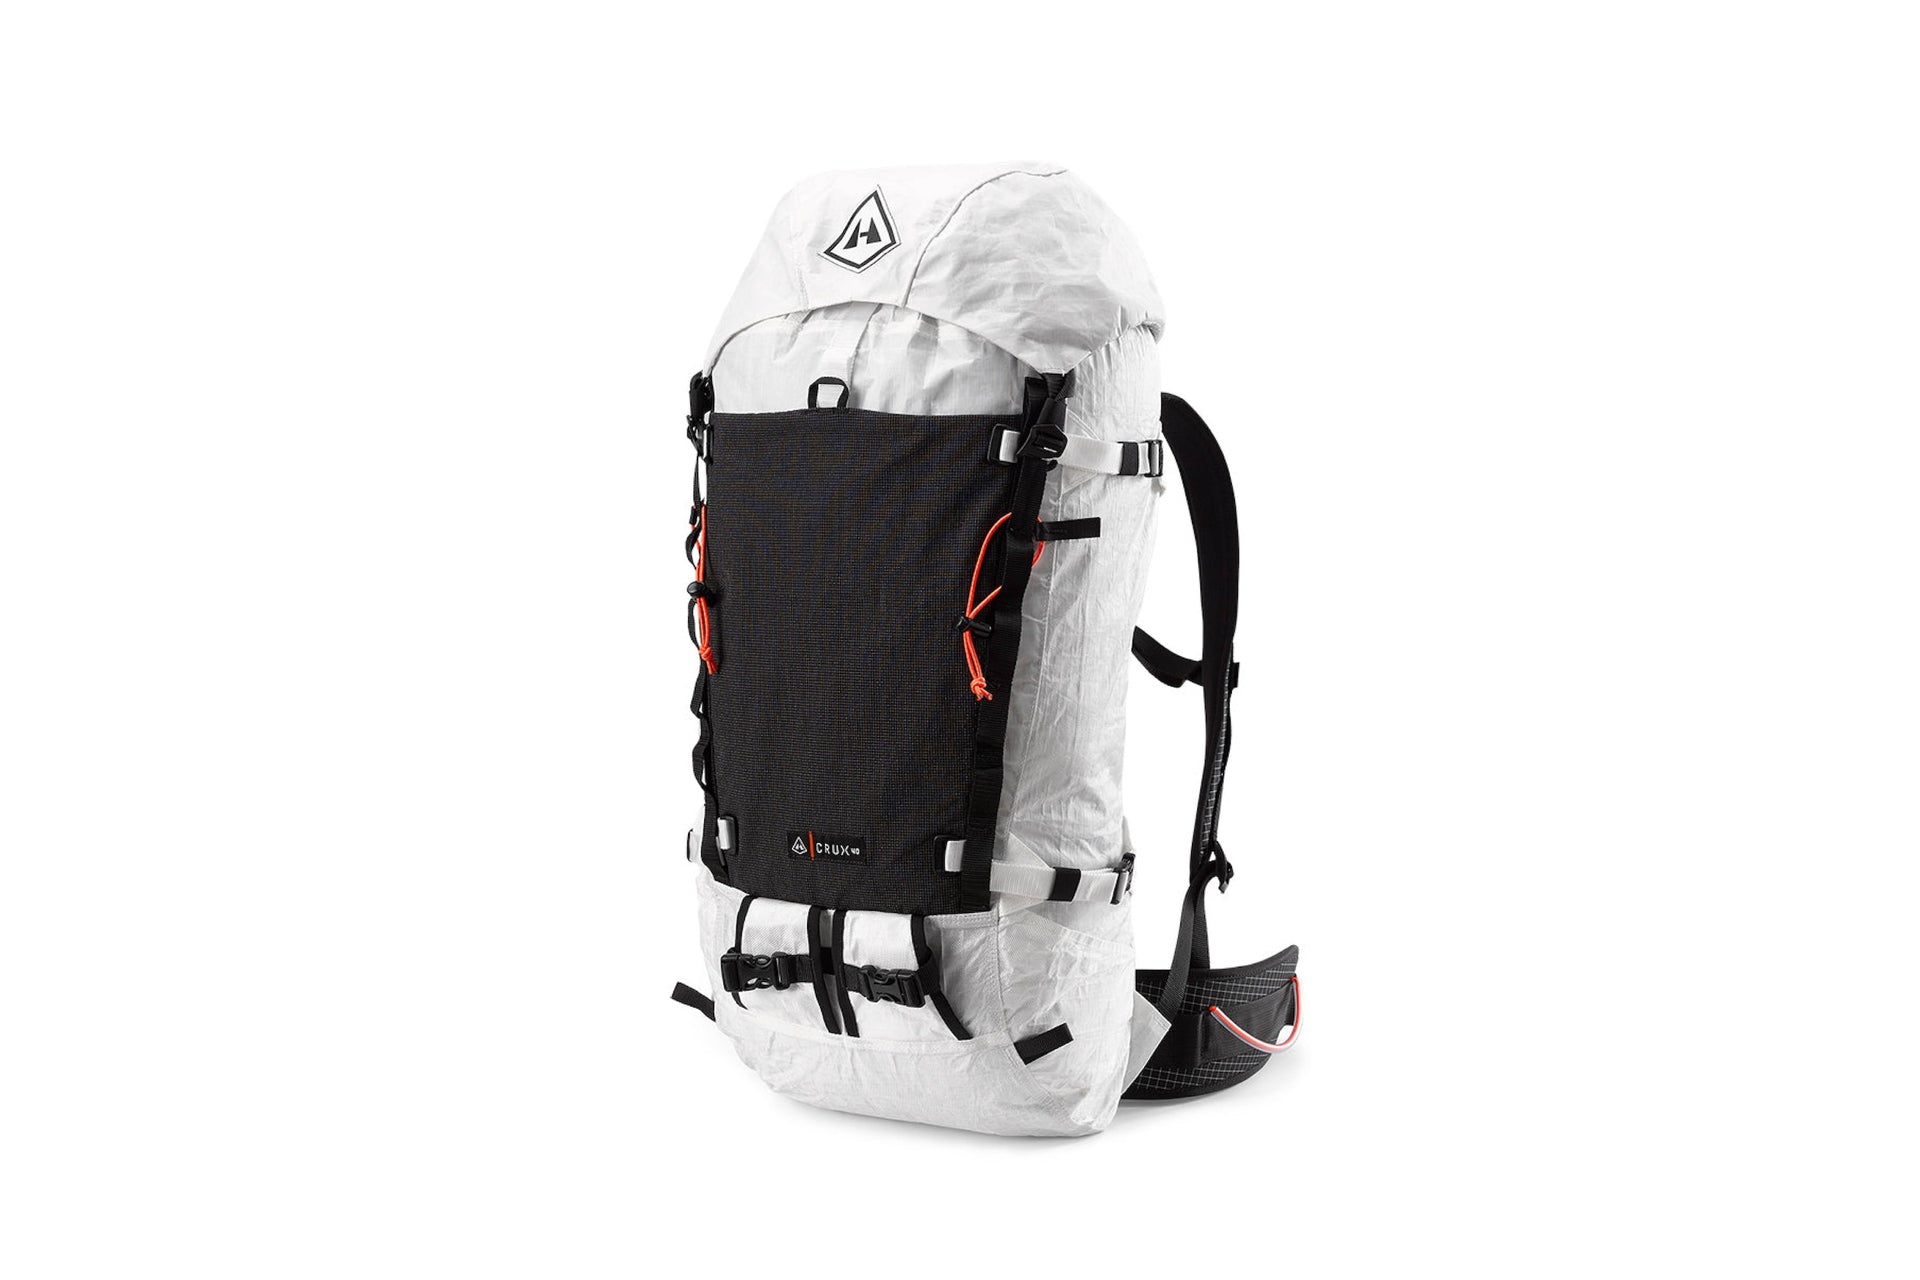 A white and orange backpack on a white background.